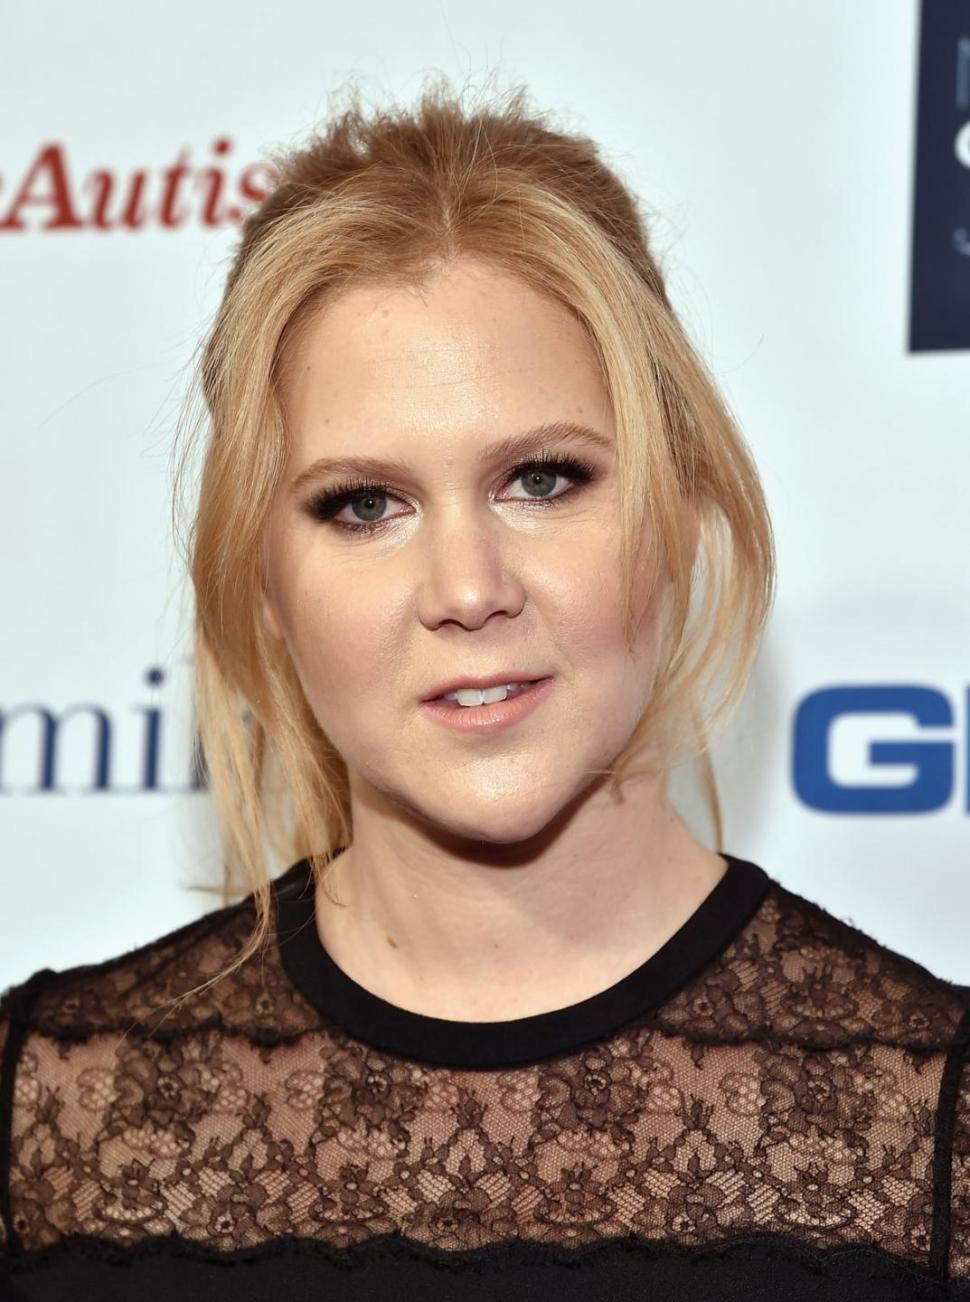 Amy Schumer couldn’t wait to do “Jerky” stuff during her school days.